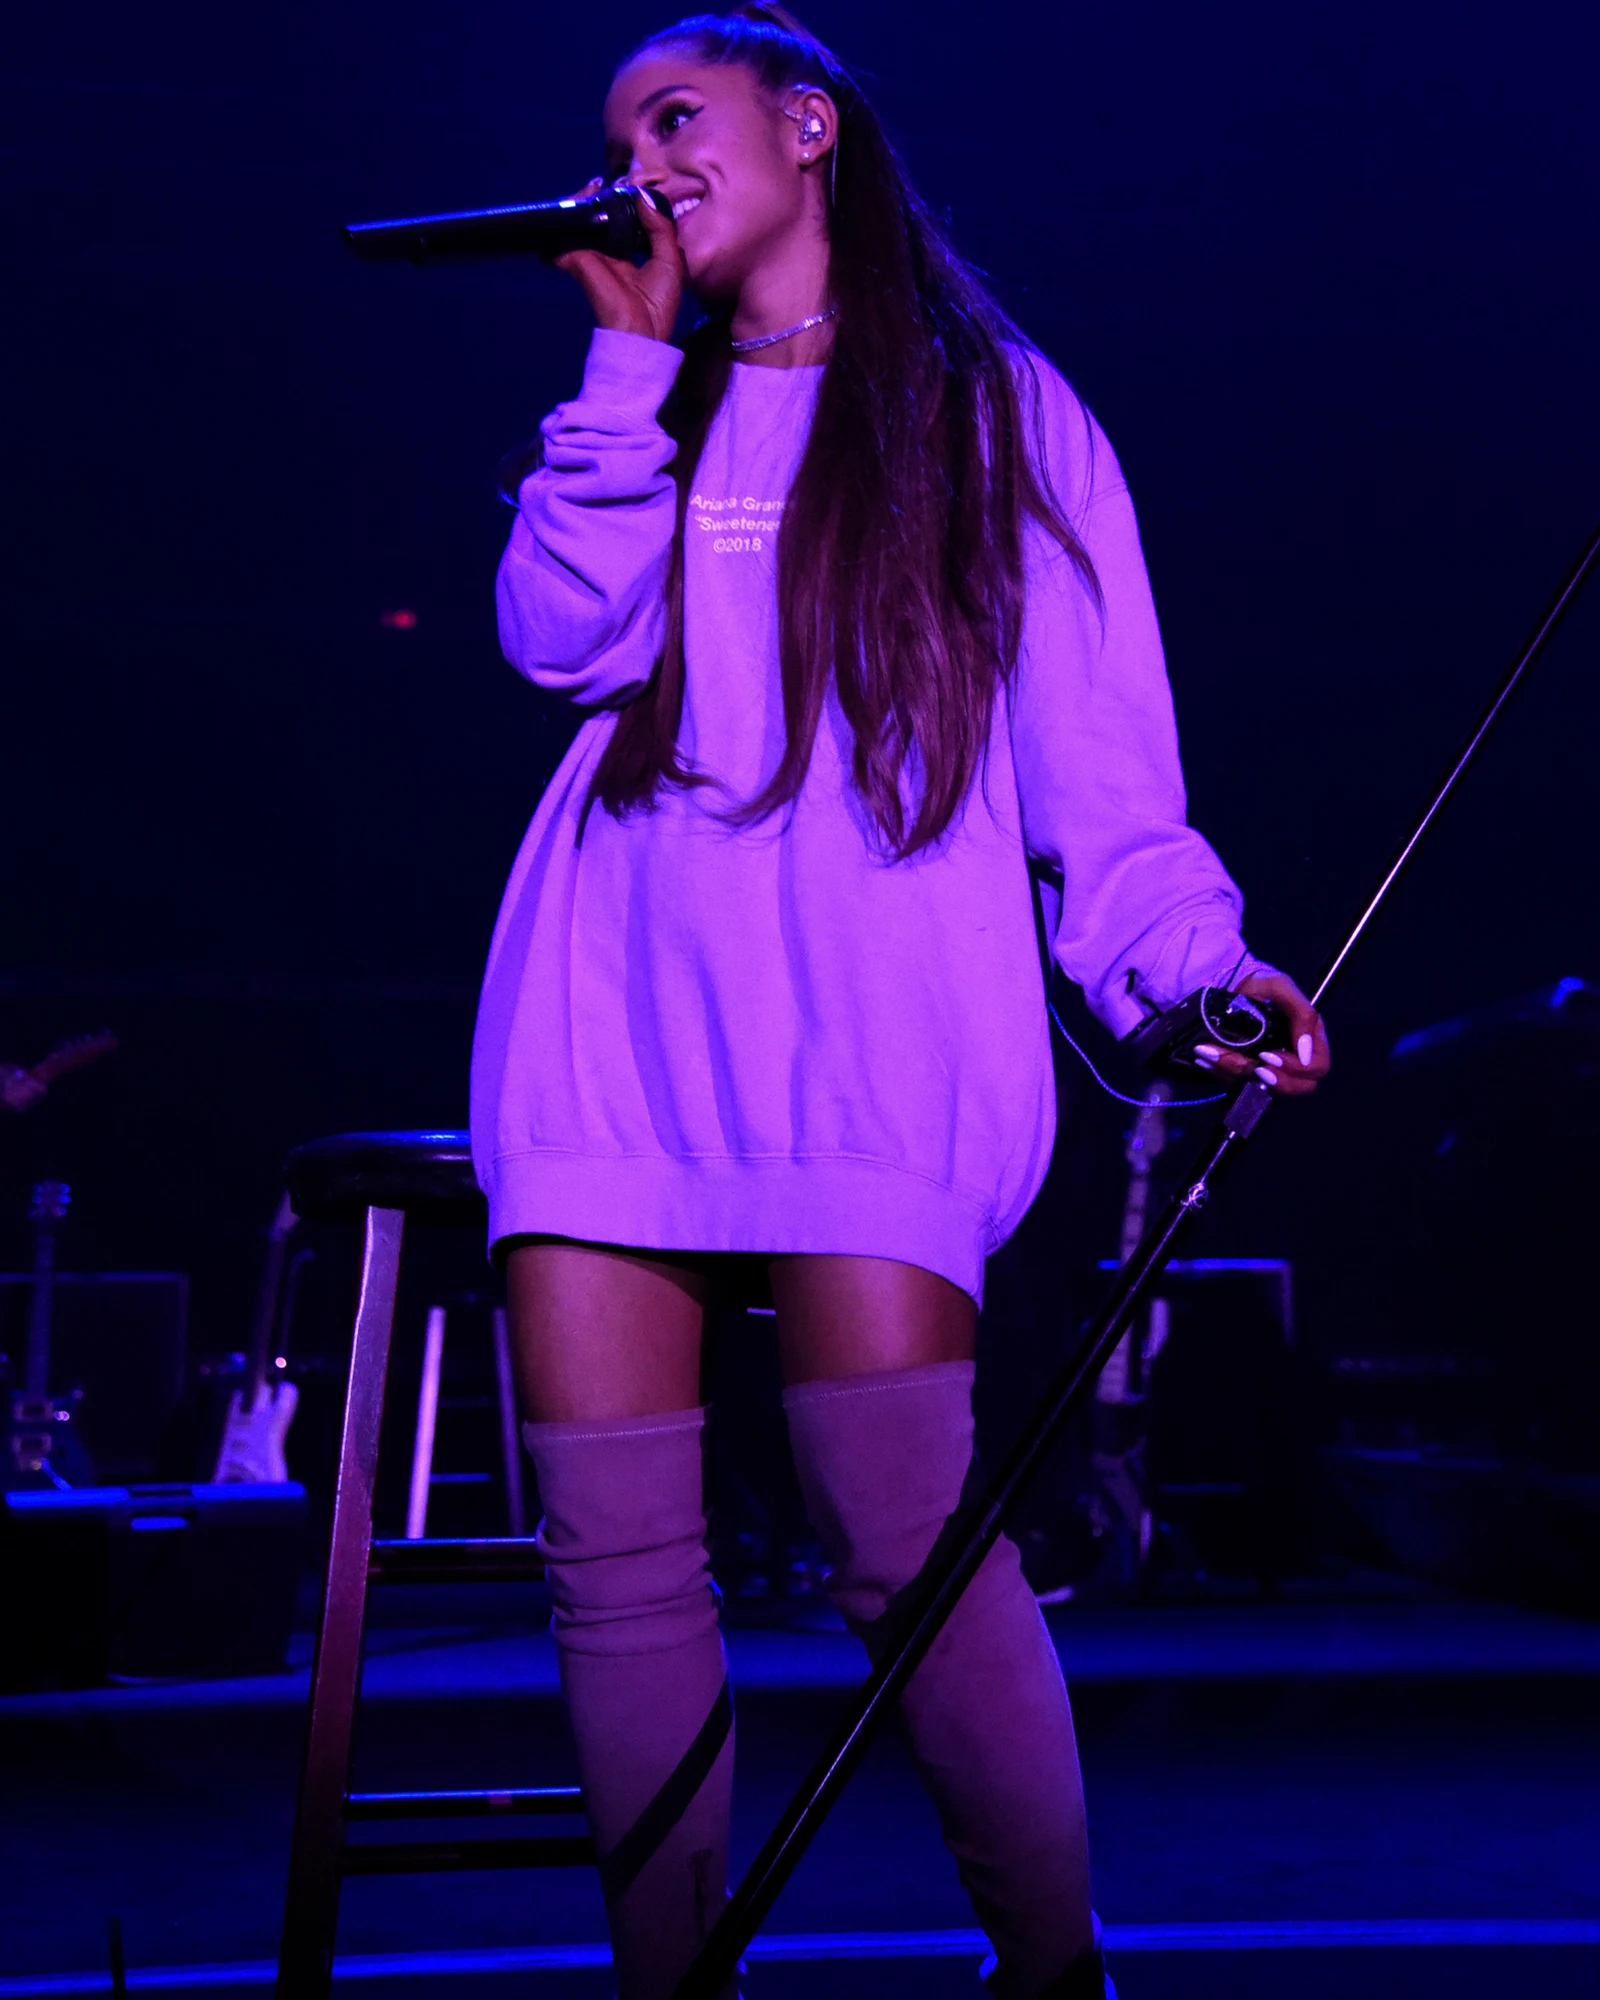 An Appreciation of Ariana Grande's Thigh-High Boot Obsession